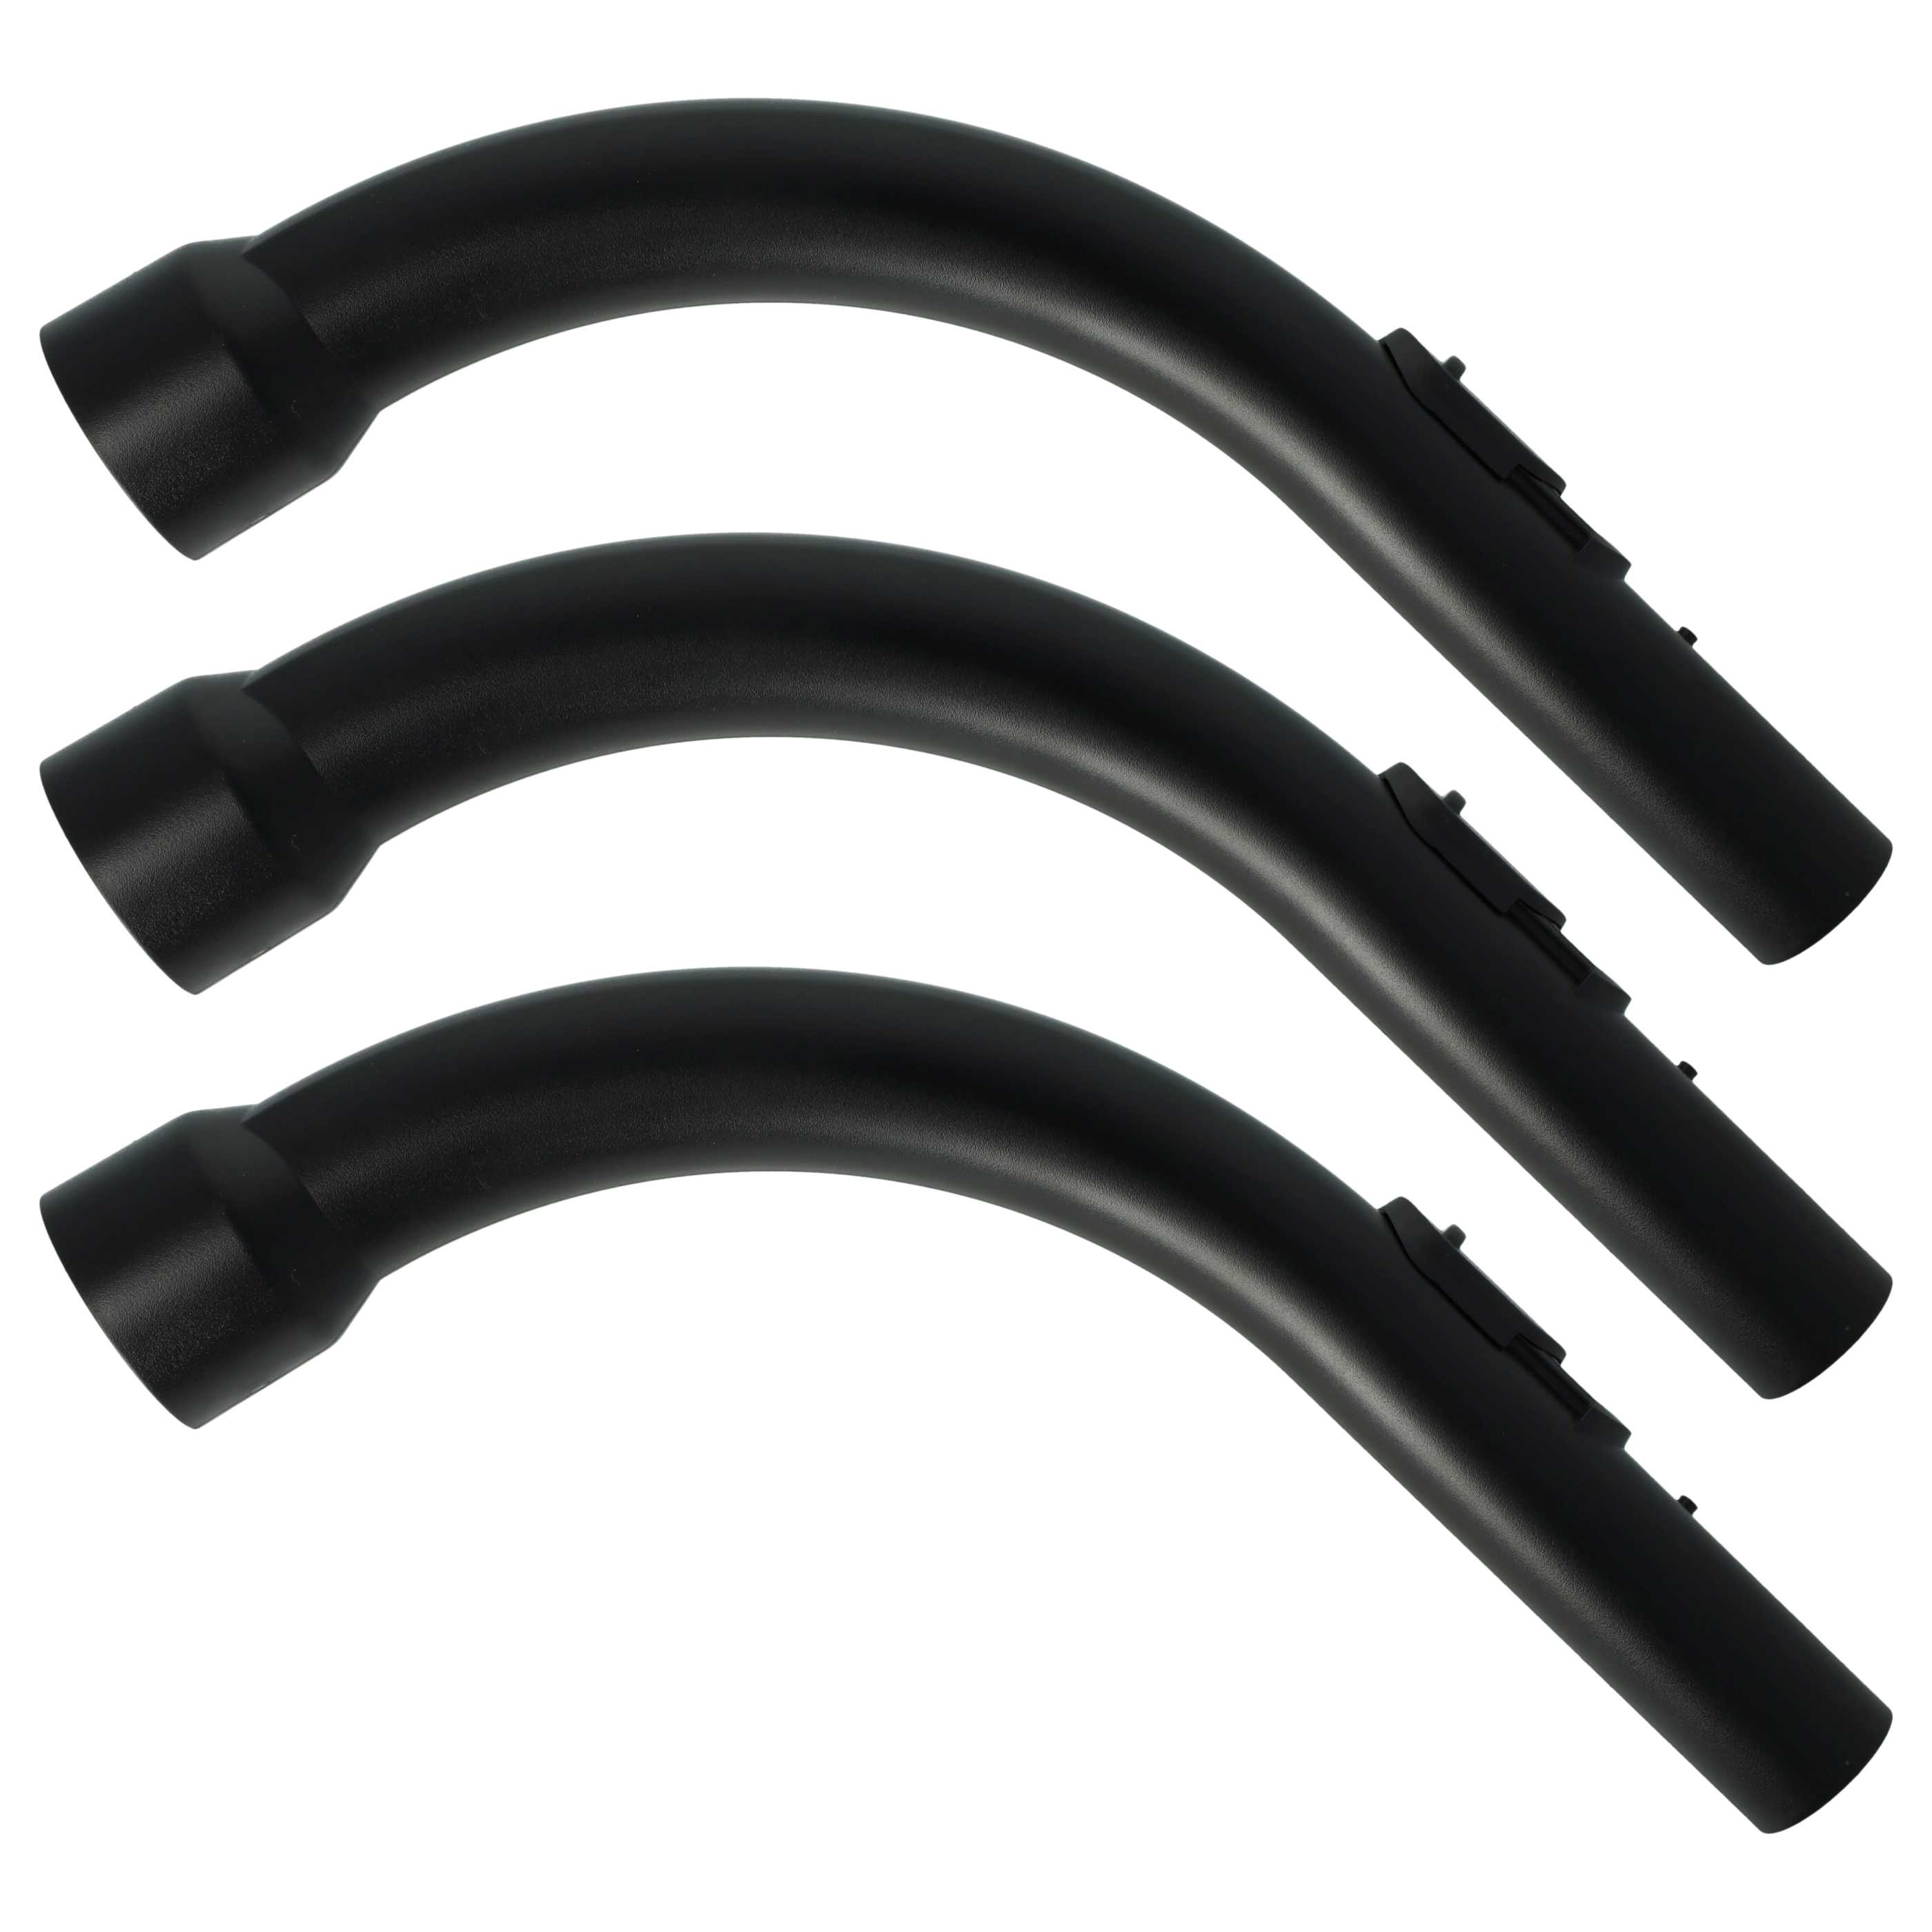 3x Vacuum Cleaner Handle as Replacement for Miele Vacuum Cleaner Handle 52690919442601 35 mm Diameter